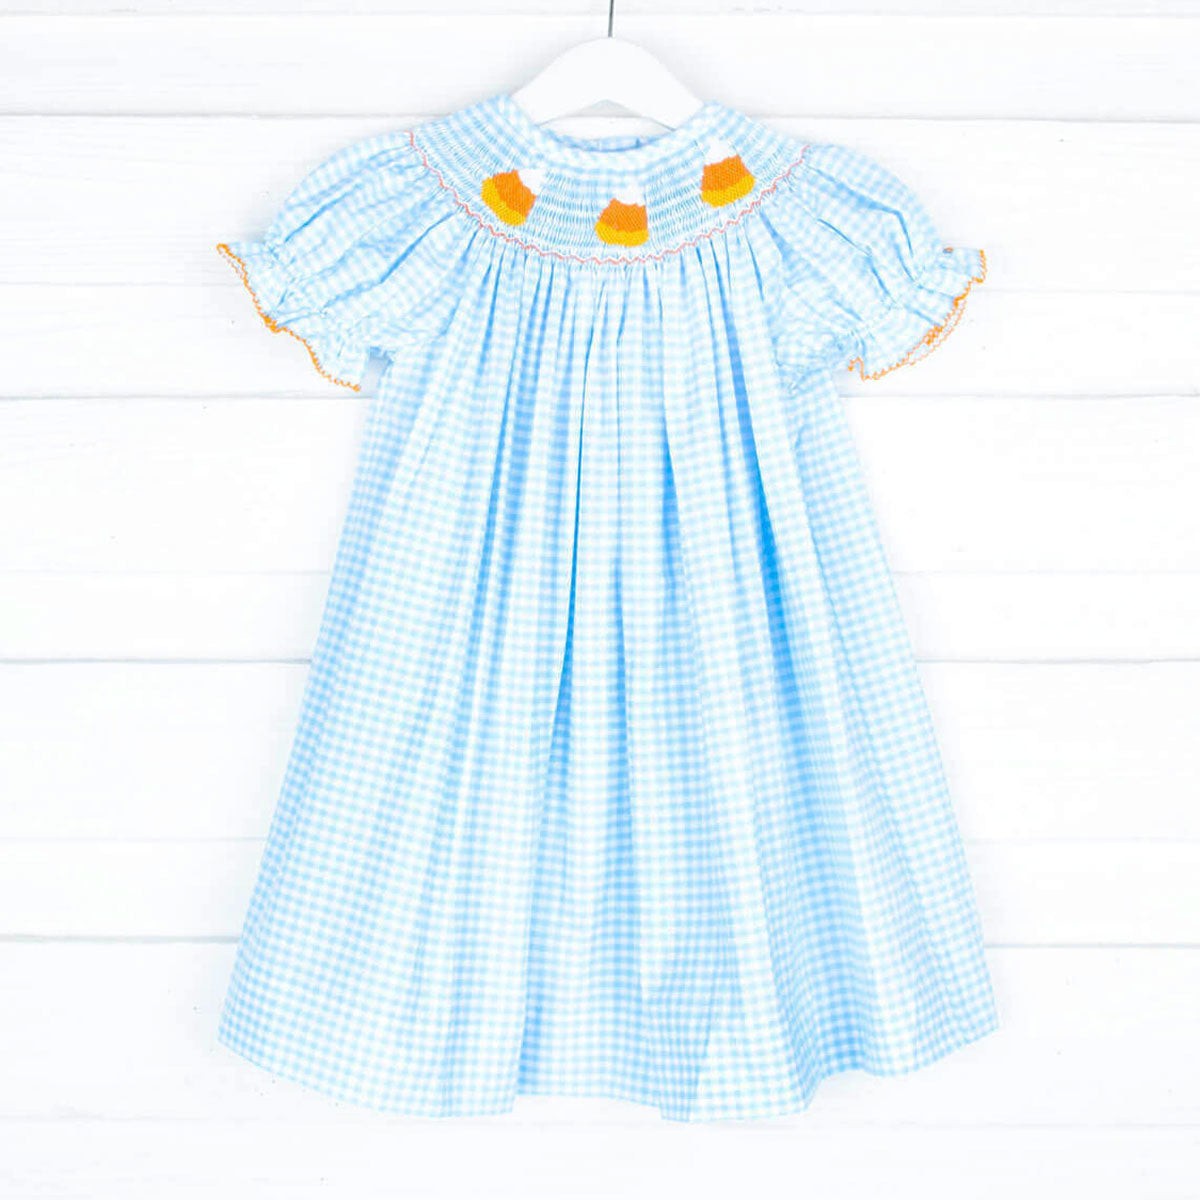 Smocked Candy Corn Turquoise Dress